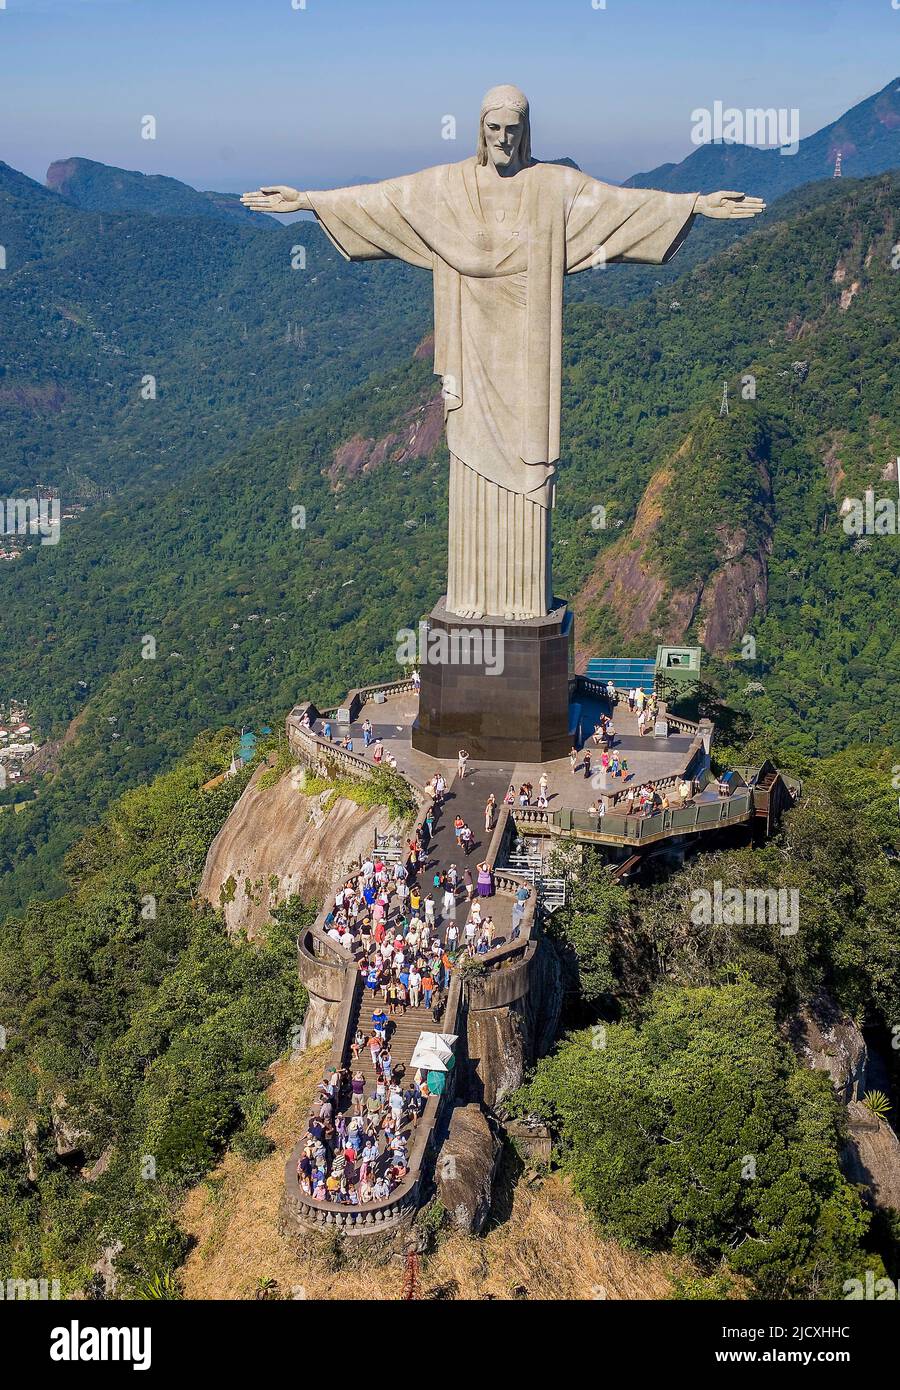 Brazil, Rio de Janeiro The statue of Christ the Redentor - Cristo Redentor - stands at the topof Corsovado mountain overlooking the city. Stock Photo